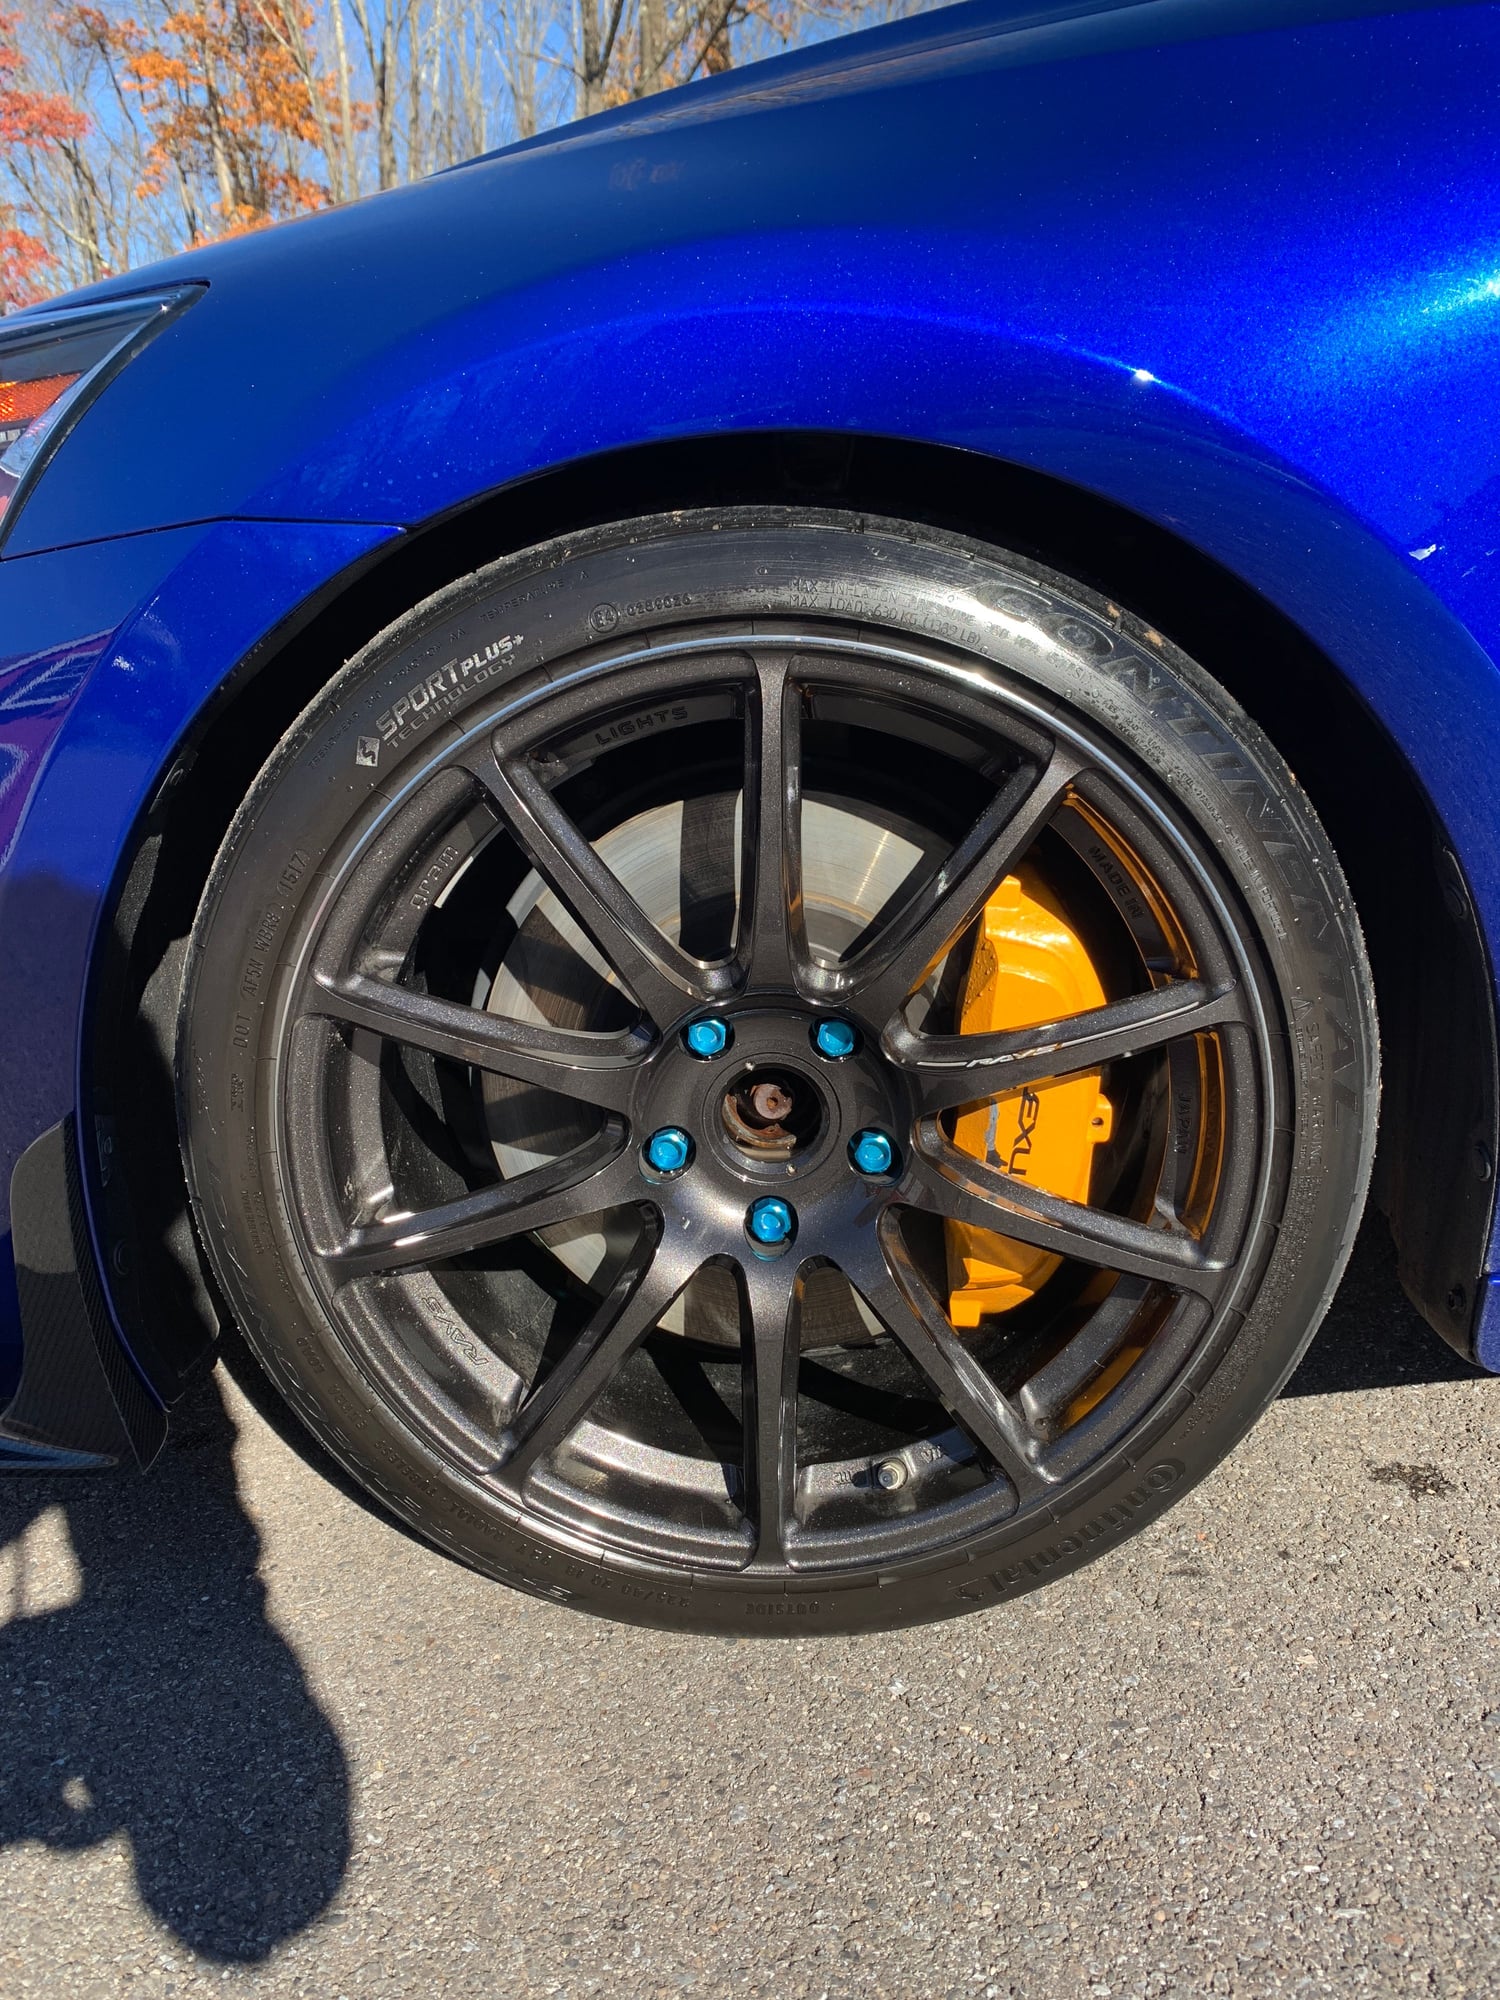 Wheels and Tires/Axles - Rays 57transcend wheels - Used - 2017 Lexus All Models - 2016 Lexus IS200t - 2014 to 2015 Lexus IS250 - 2016 to 2019 Lexus IS300 - 2014 to 2019 Lexus IS350 - Milford, NJ 08848, United States